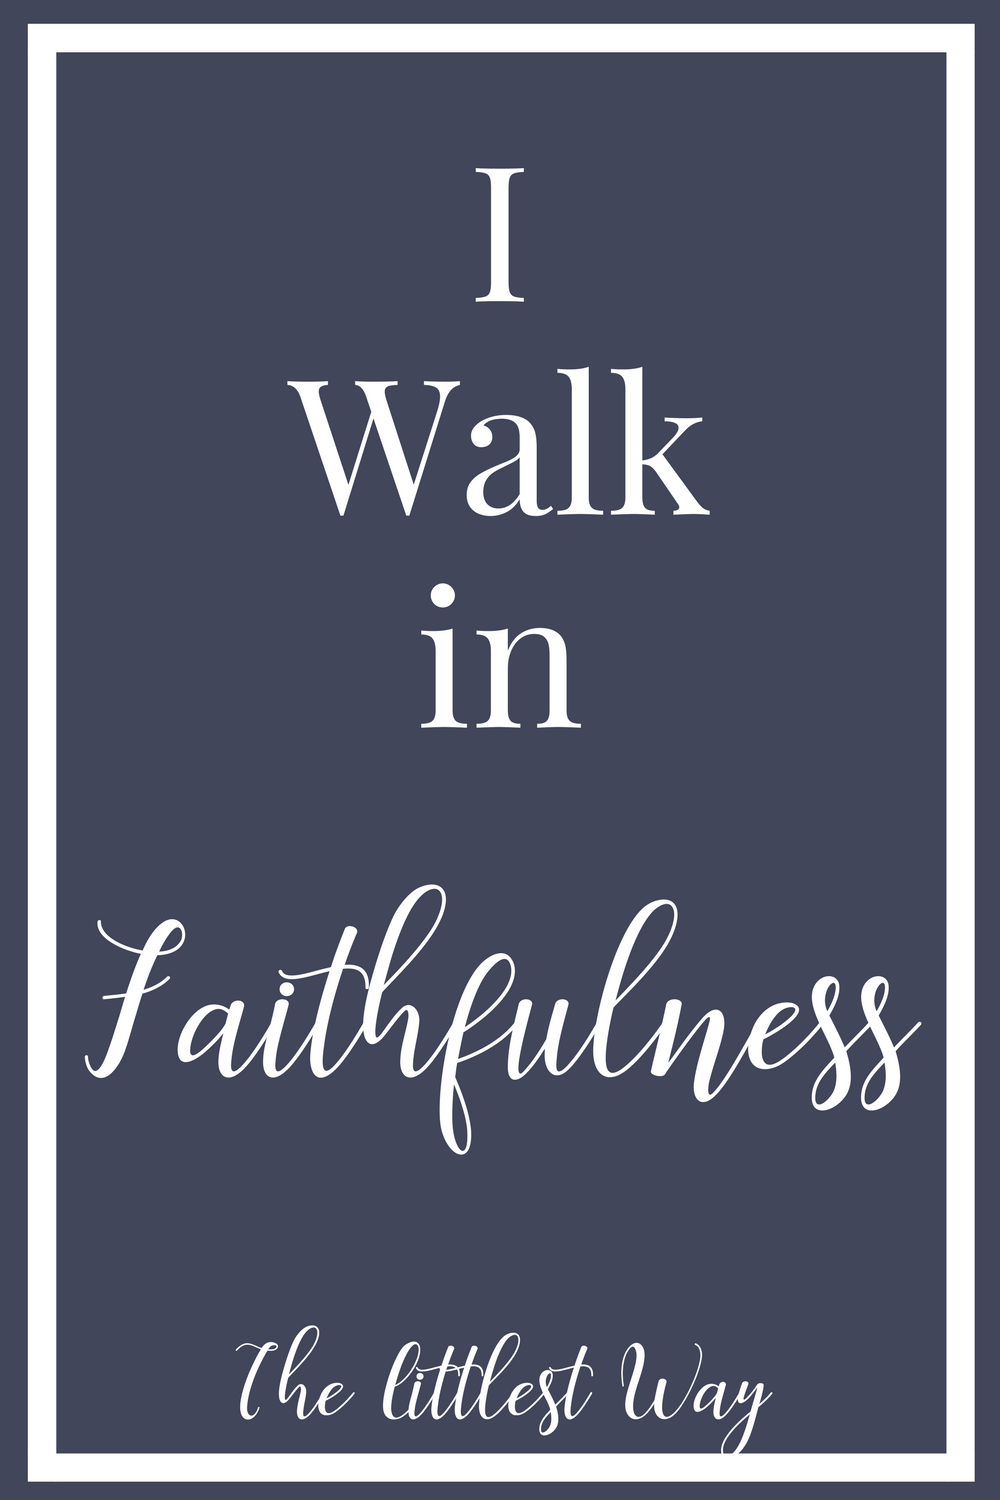 I walk in faithfulness should become a part of our daily, scriptural affirmations.